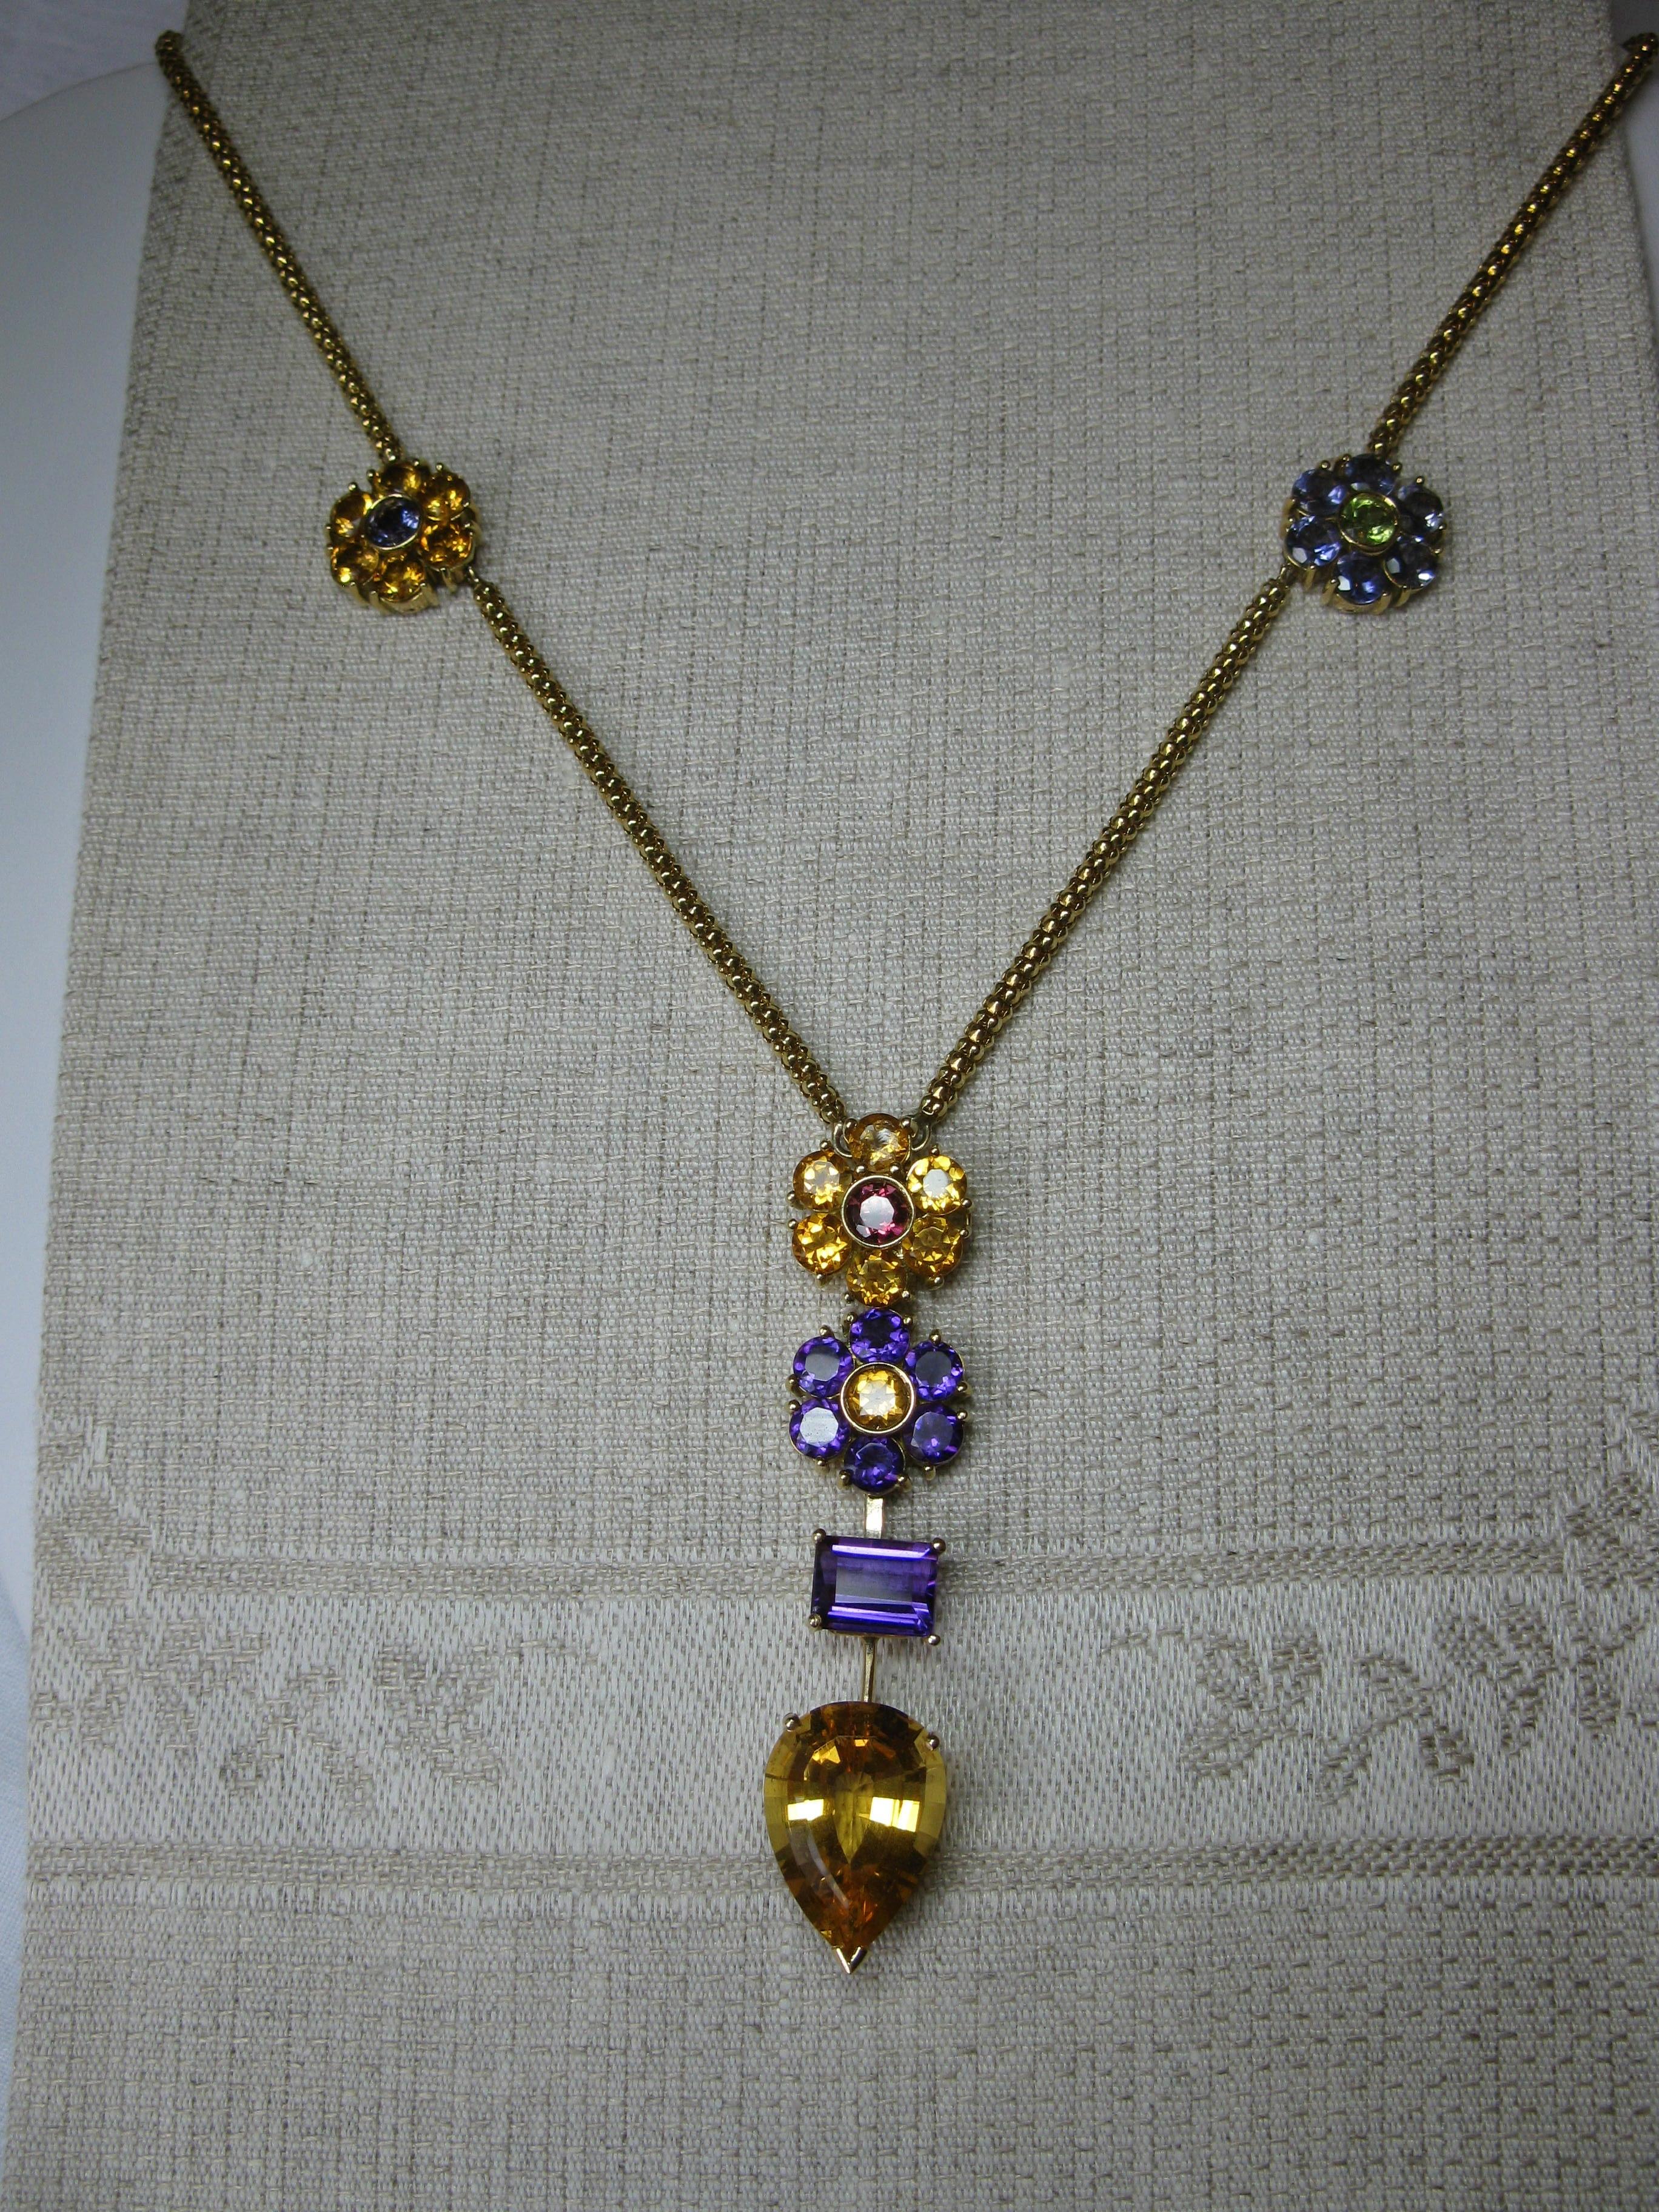 A stunning vintage Chimento Multi-Gem Necklace set with Citrine, Tanzanite, Amethyst and Peridot Flowers and Gems in 18 Karat Yellow Gold.  The effect of Chimento's gorgeous gold work with the wonderful gems creates a magical necklace!  The necklace